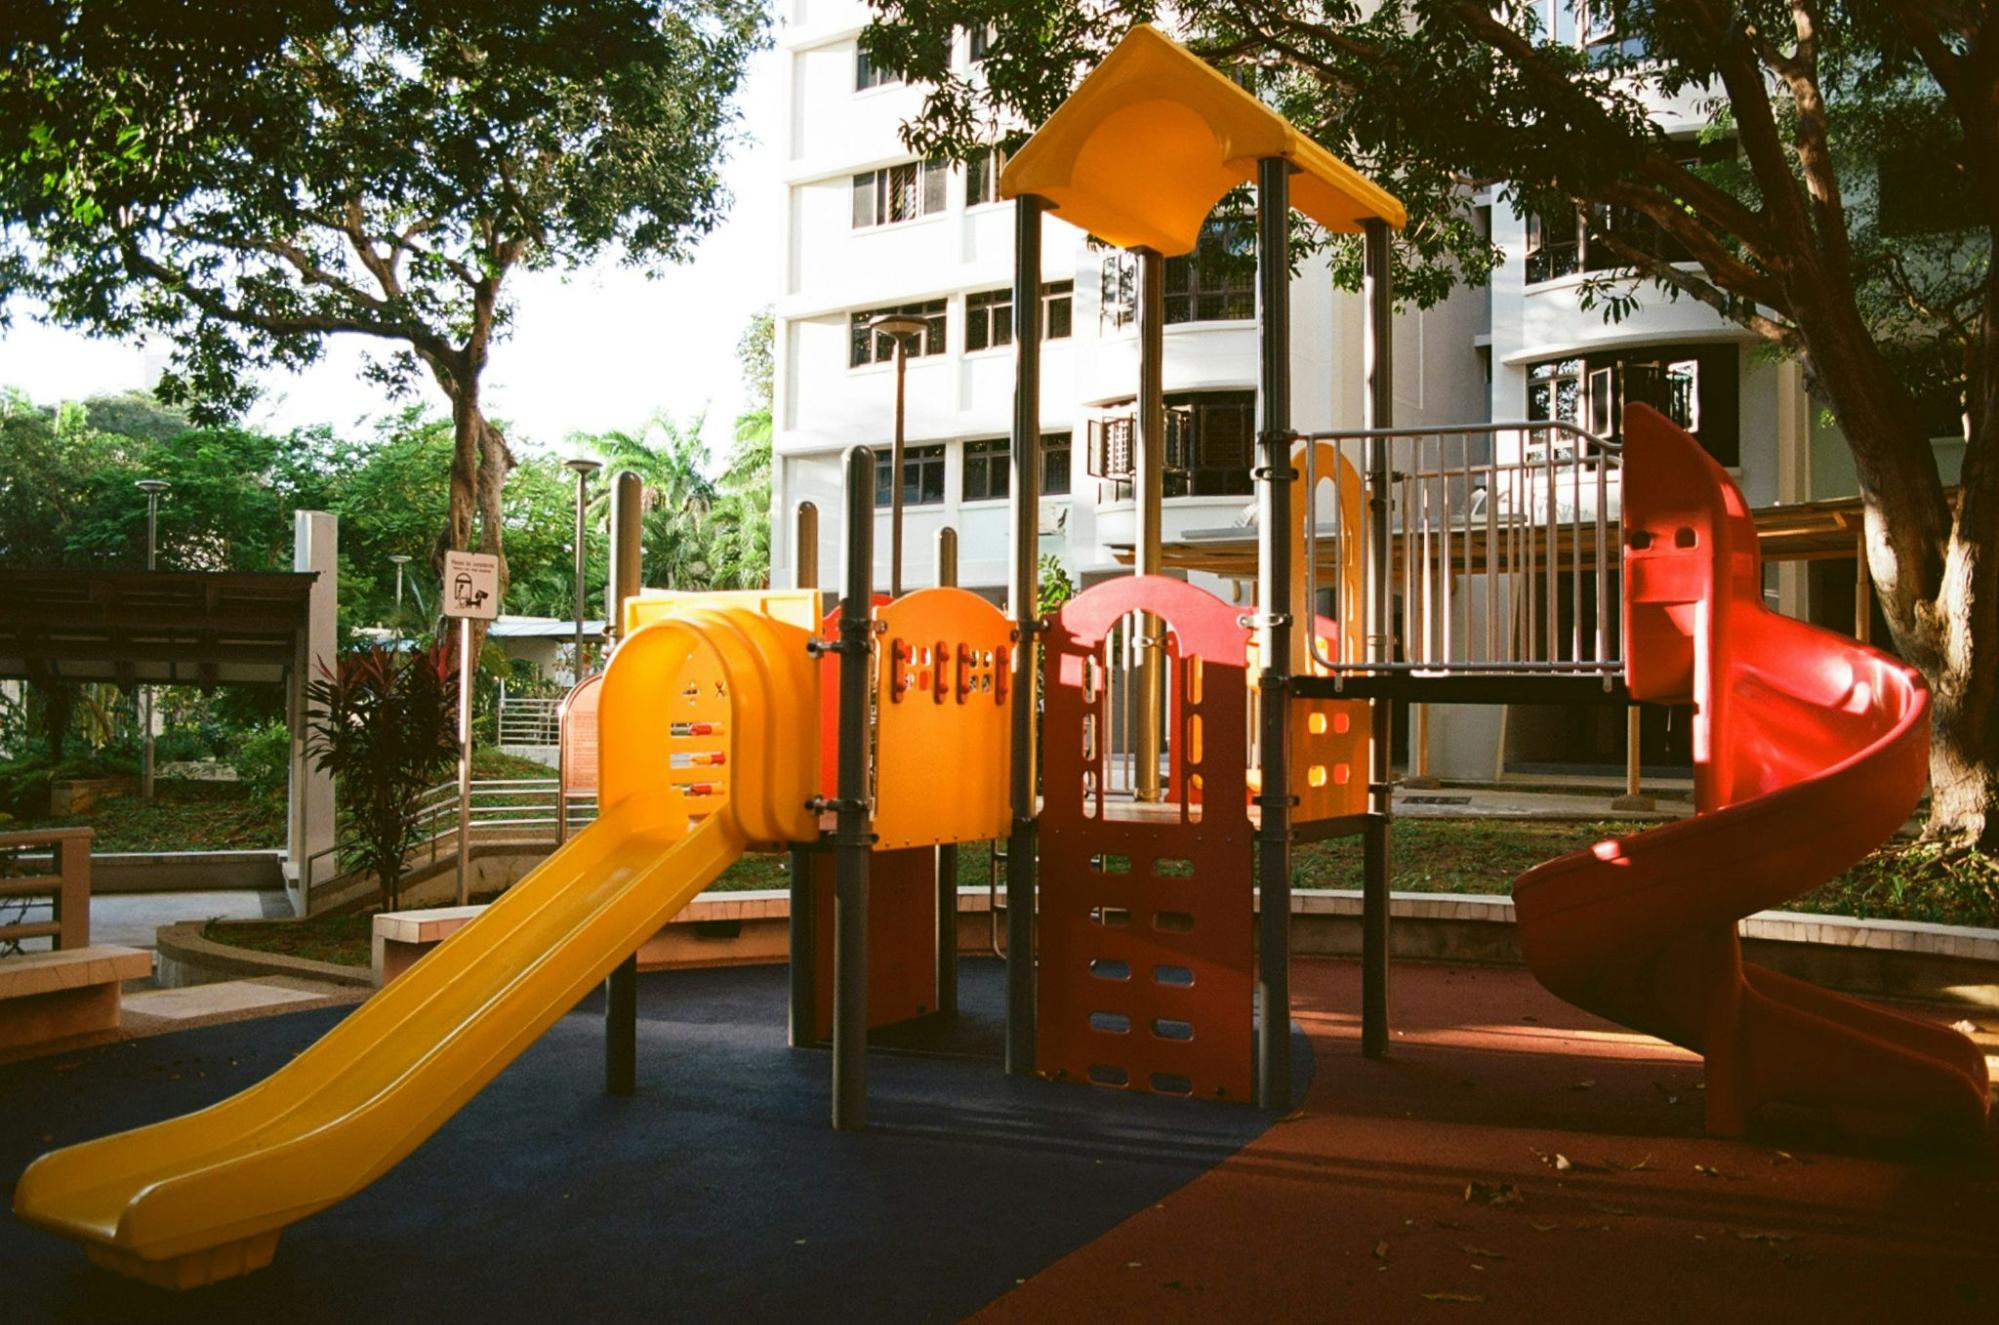 Colorful children’s playground equipment with slides and climbing structures in a park setting